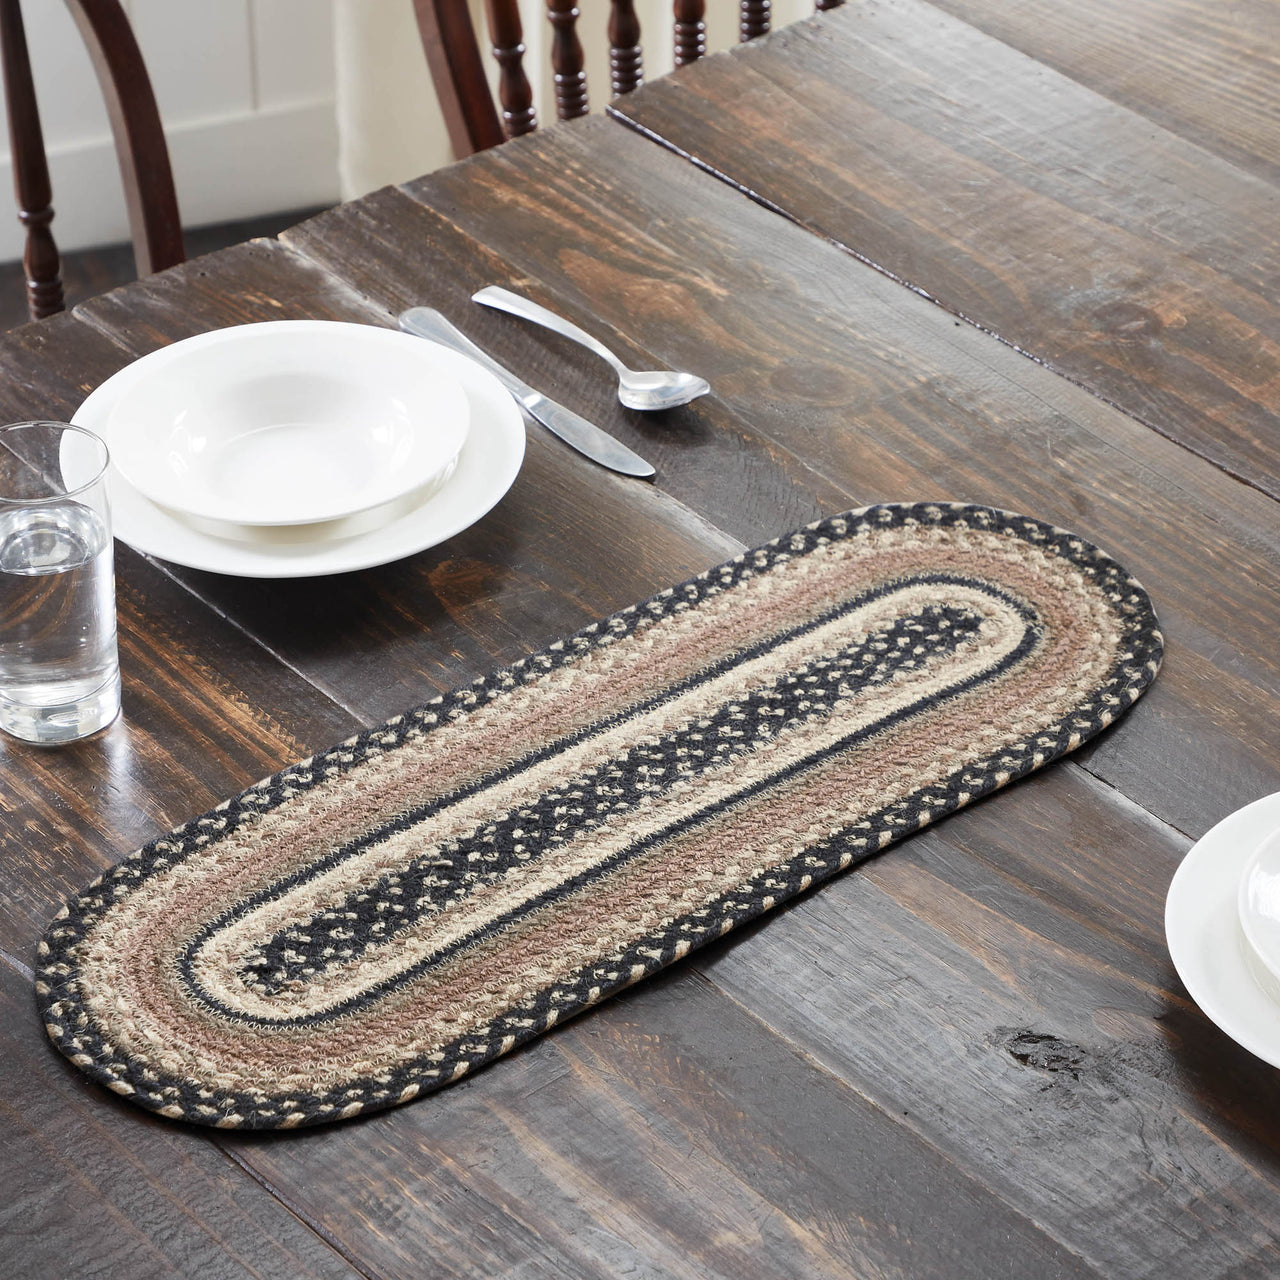 Sawyer Mill Charcoal Creme Jute Braided Oval Table Runner 8"x24" VHC Brands